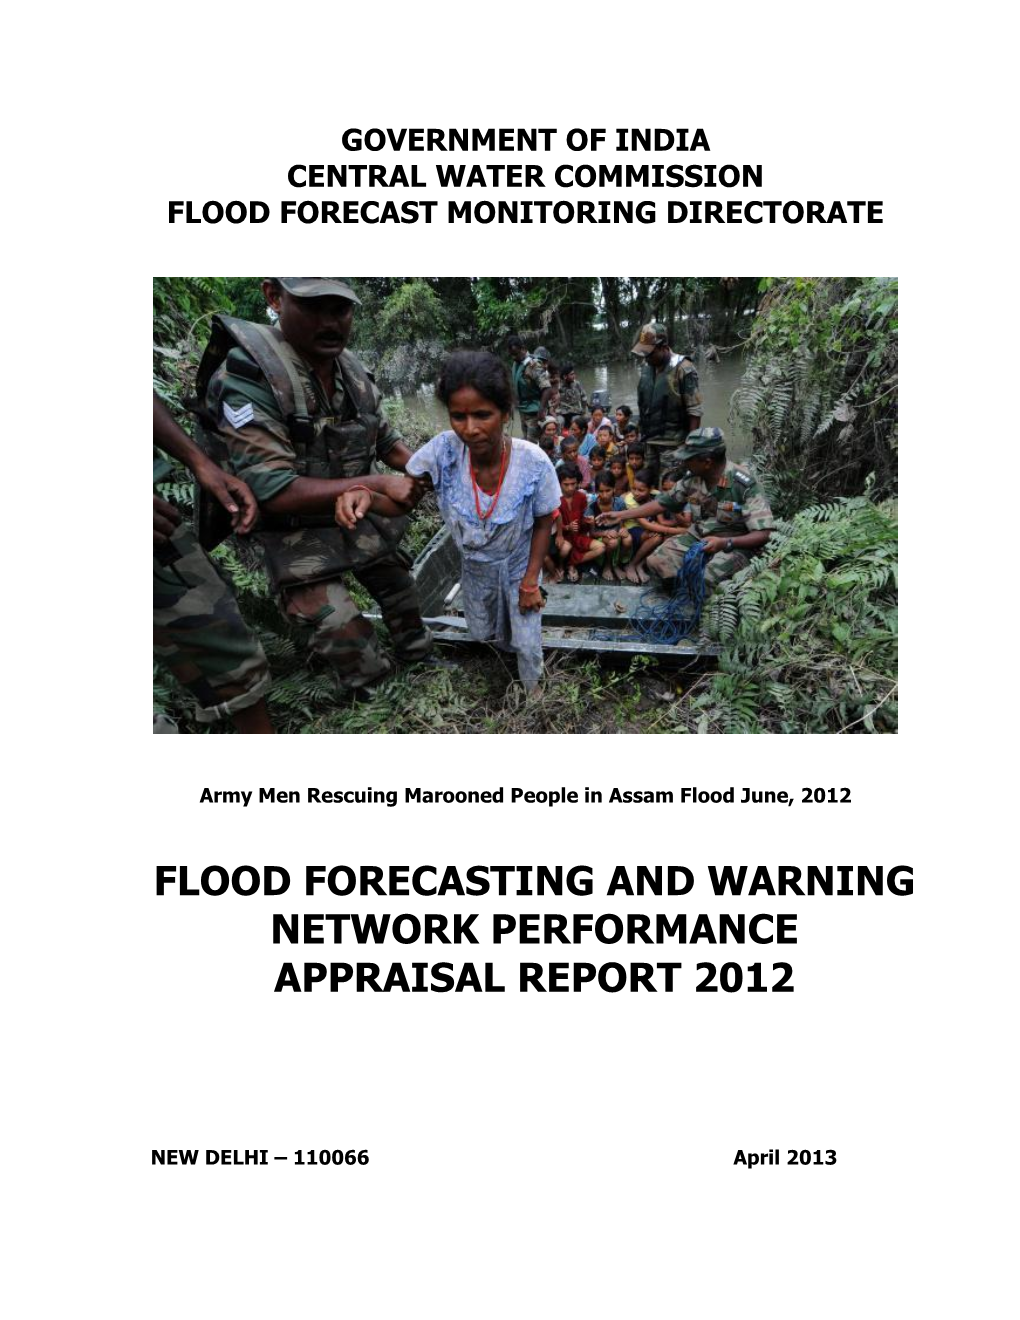 Flood Forecasting and Warning Network Performance Appraisal Report 2012